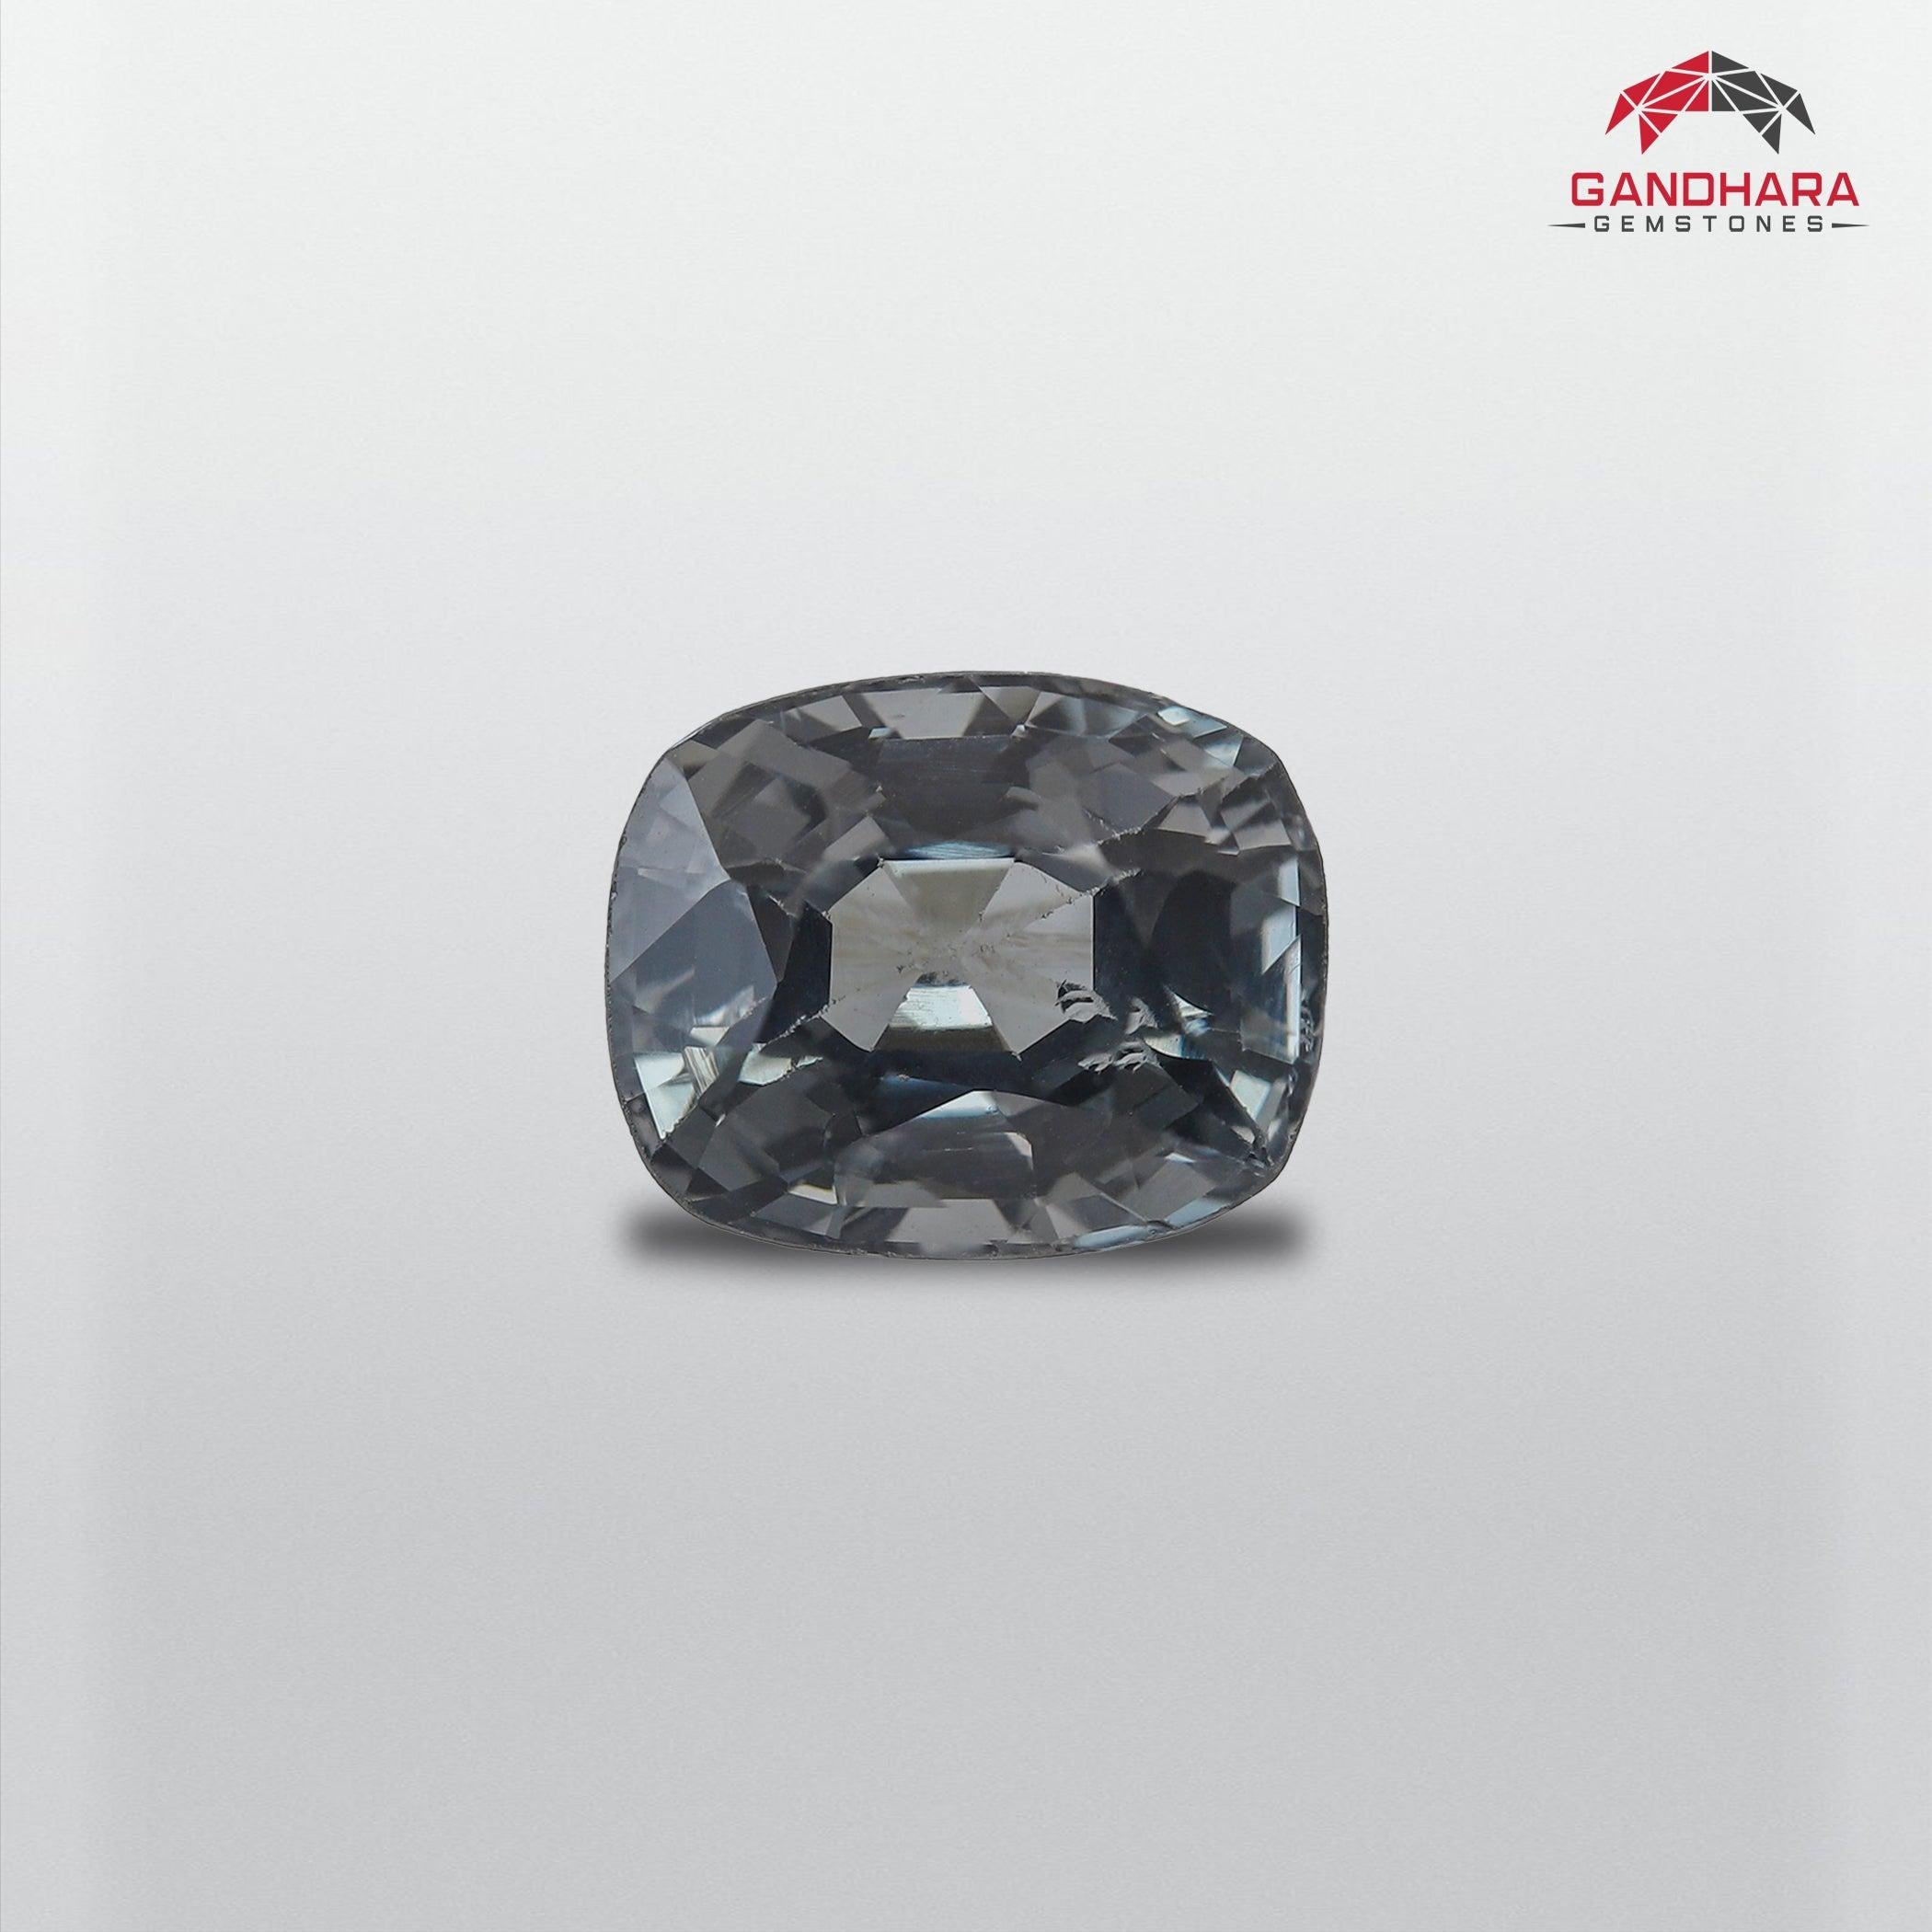 Silver Gray Natural Spinel Gemstone of 1.80 Carats from Burma has a wonderful cut in a Cushion shape, incredible Silver,Gray Color. Great brilliance. This gem is SI Clarity.

Product Information:
GEMSTONE TYPE:	Silver Gray Natural Spinel